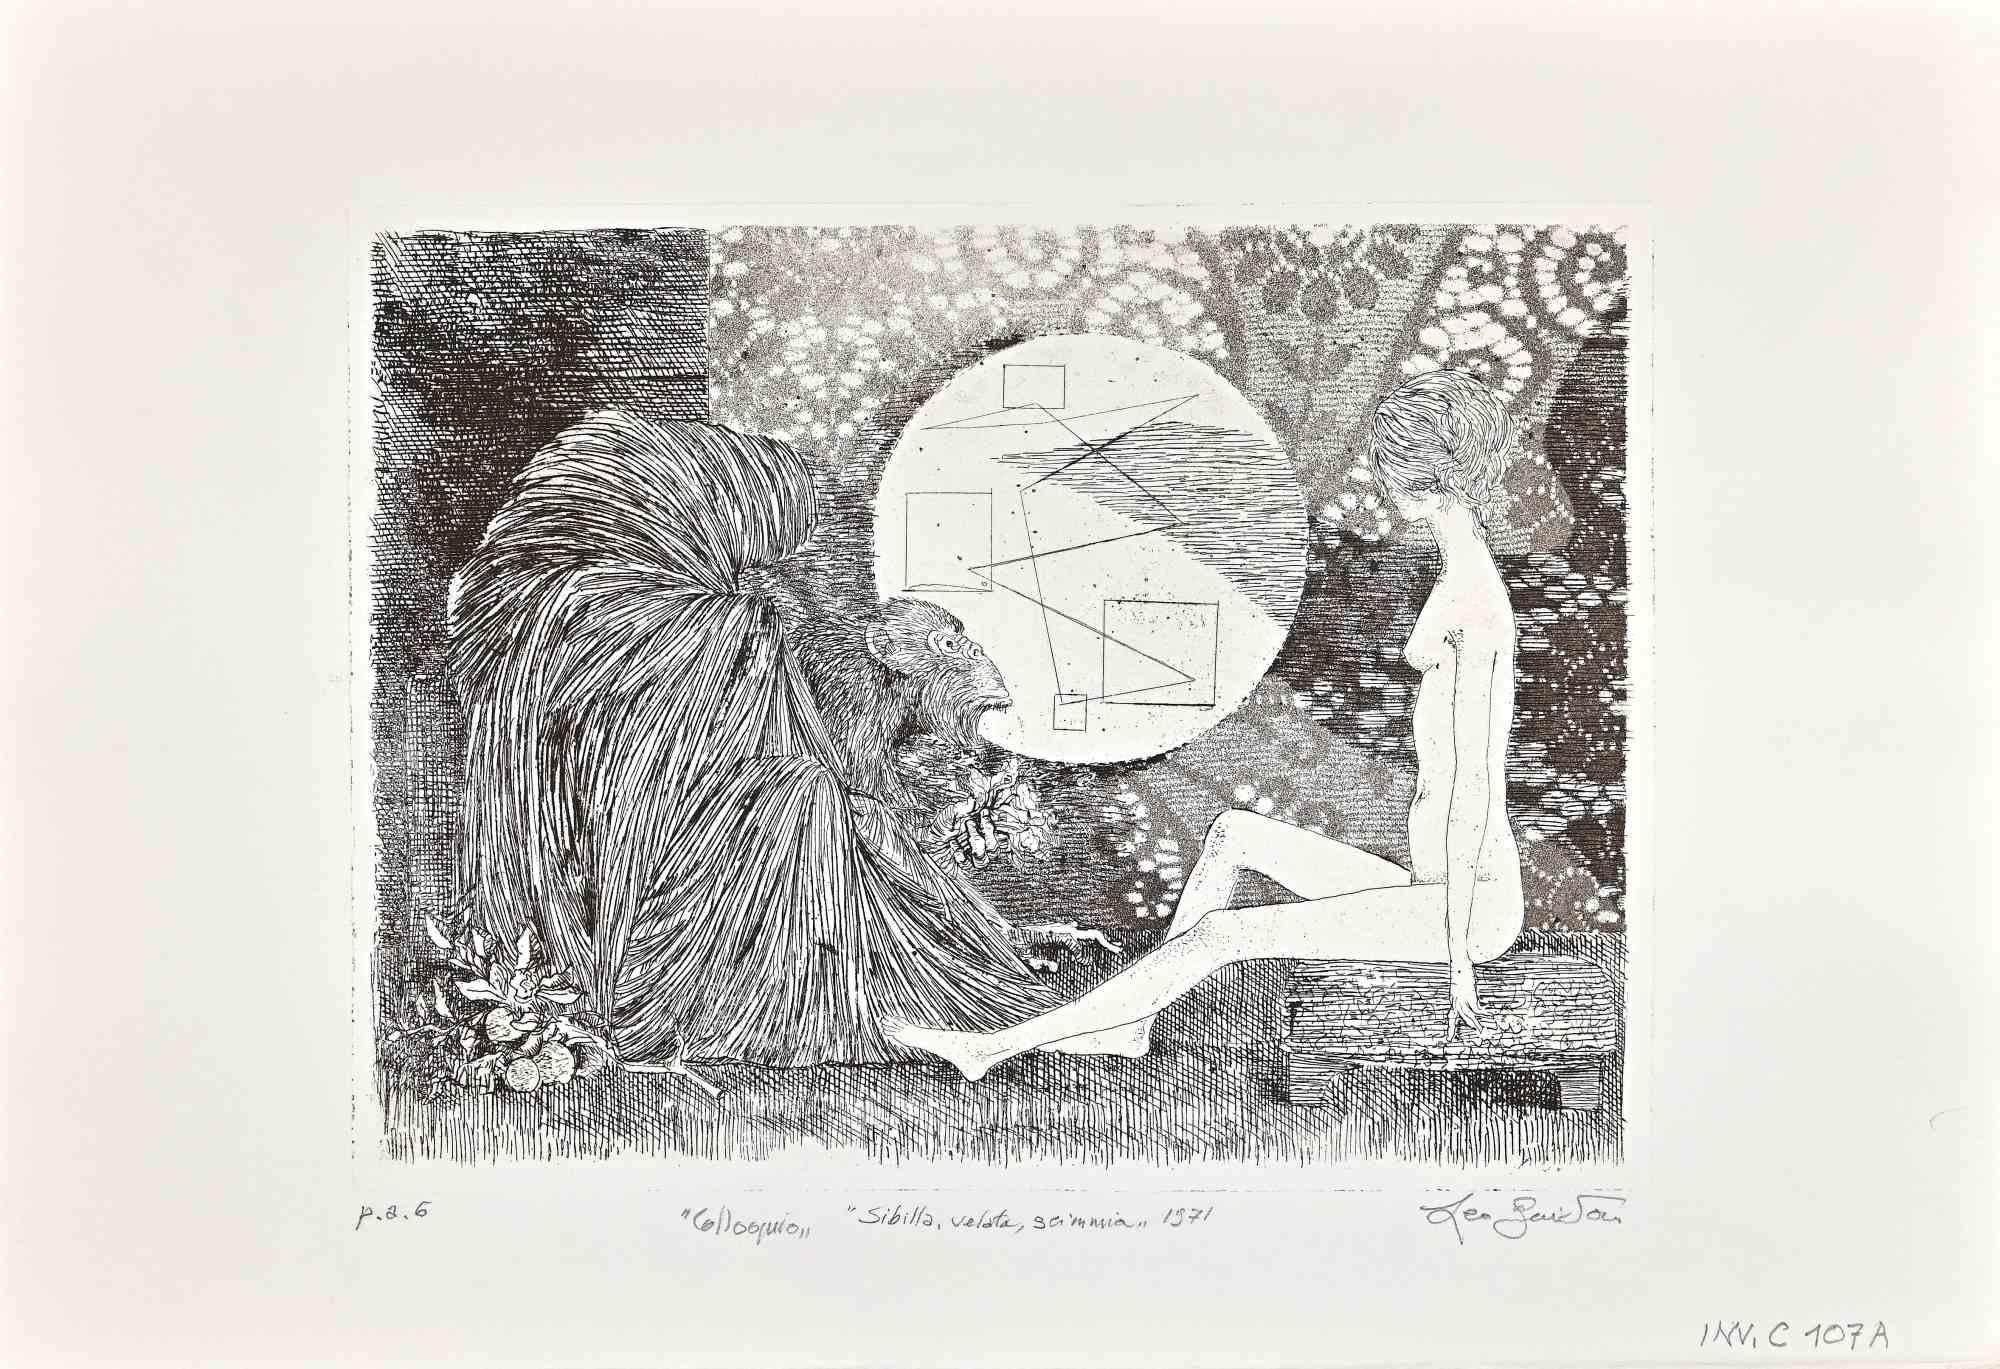 Sybil, veiled, Monkey is an  Etching realized by Leo Guida in 1971s.

Good condition, proof artist.

Hand signed, titled and dated by the artist with pencil on the lower margin.

Artist sensitive to current issues, artistic movements and historical